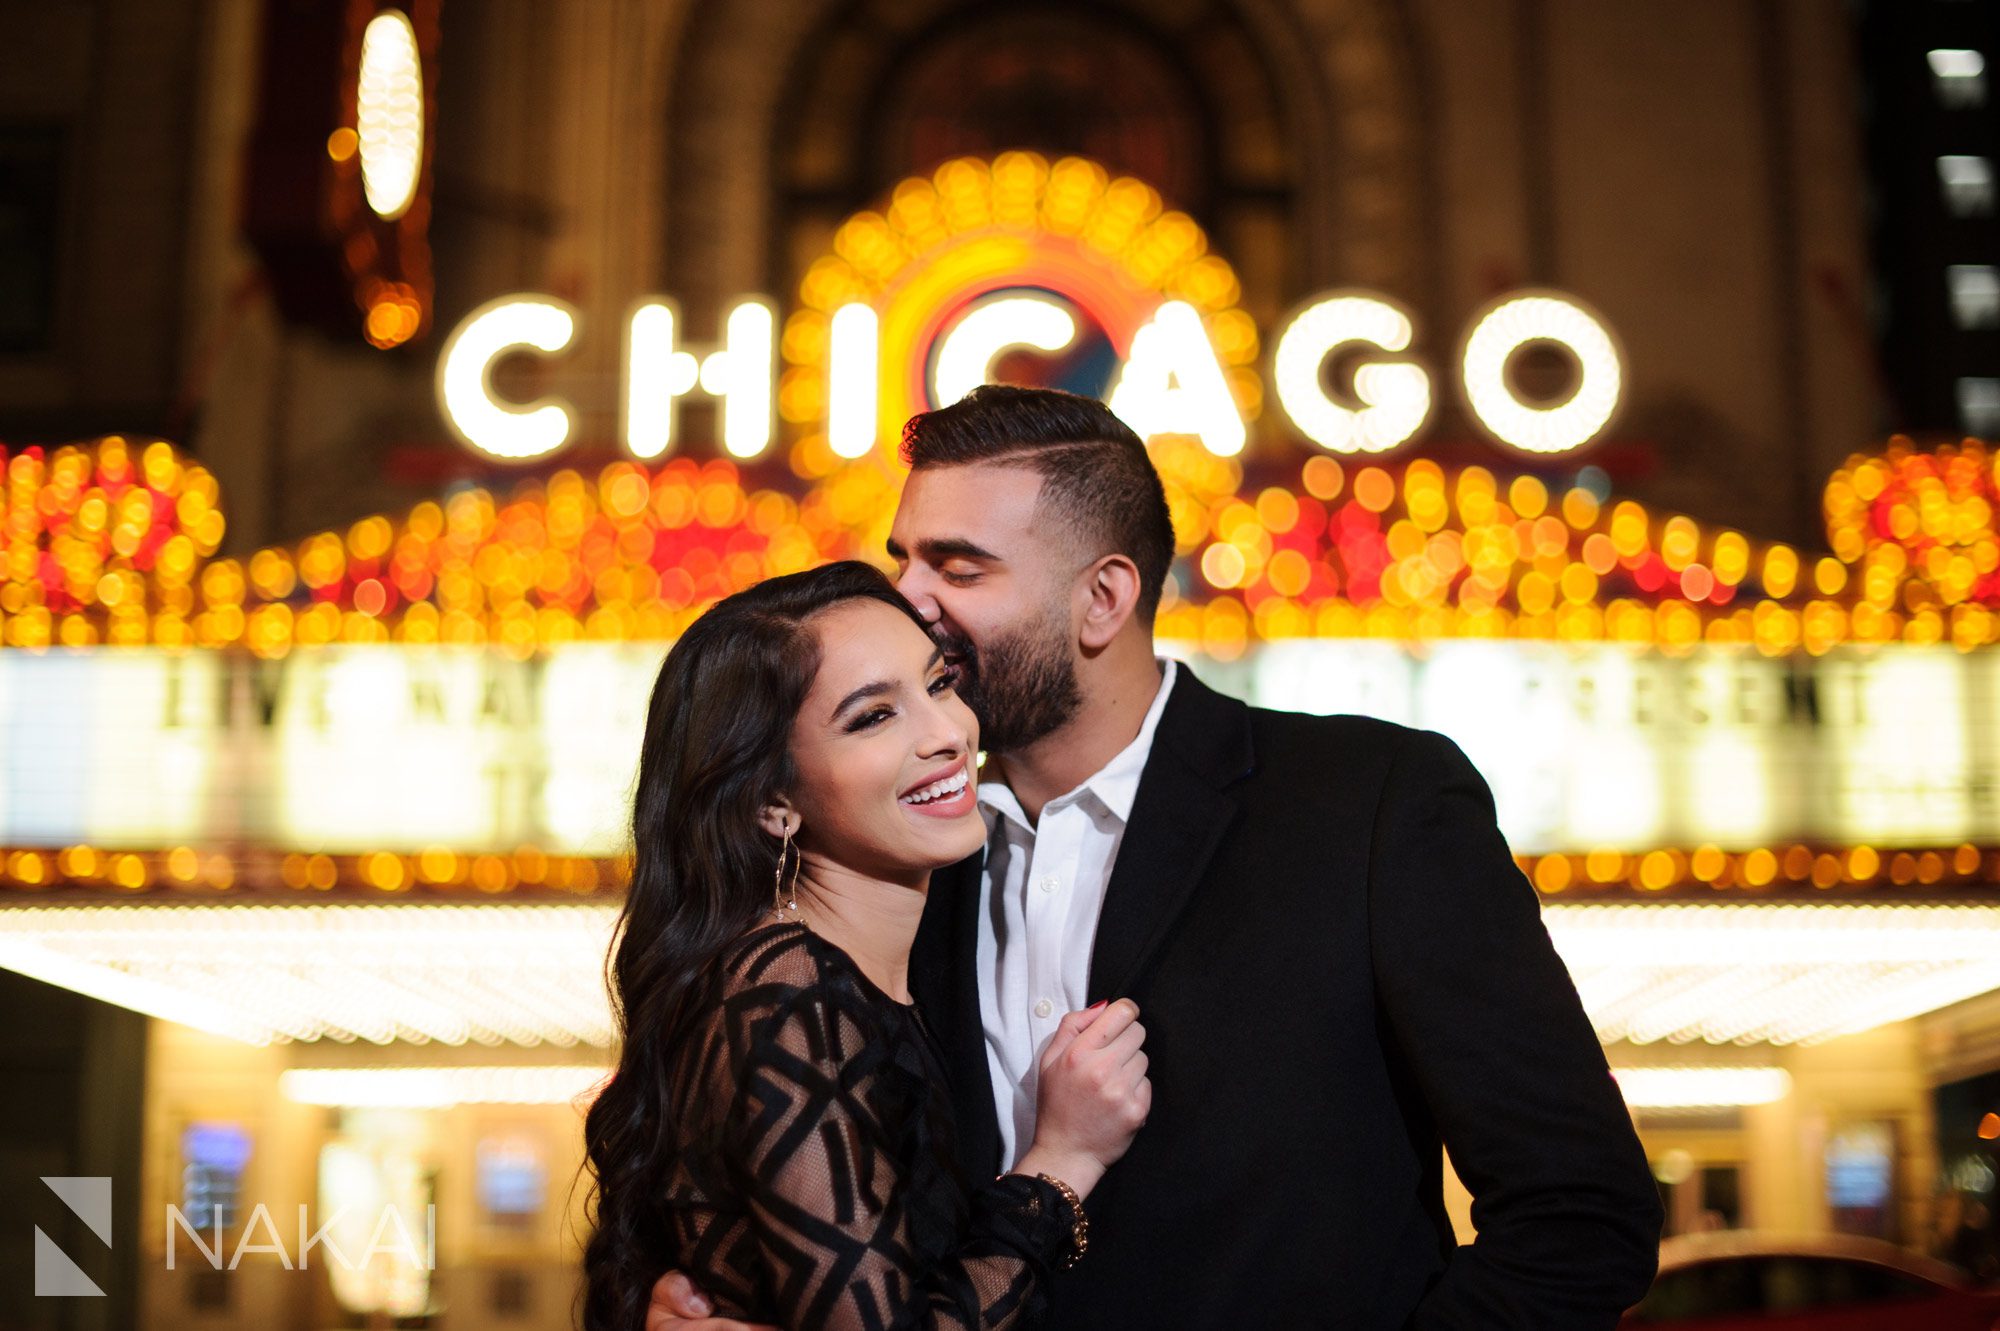 best night chicago engagement locations photographer marquee sign